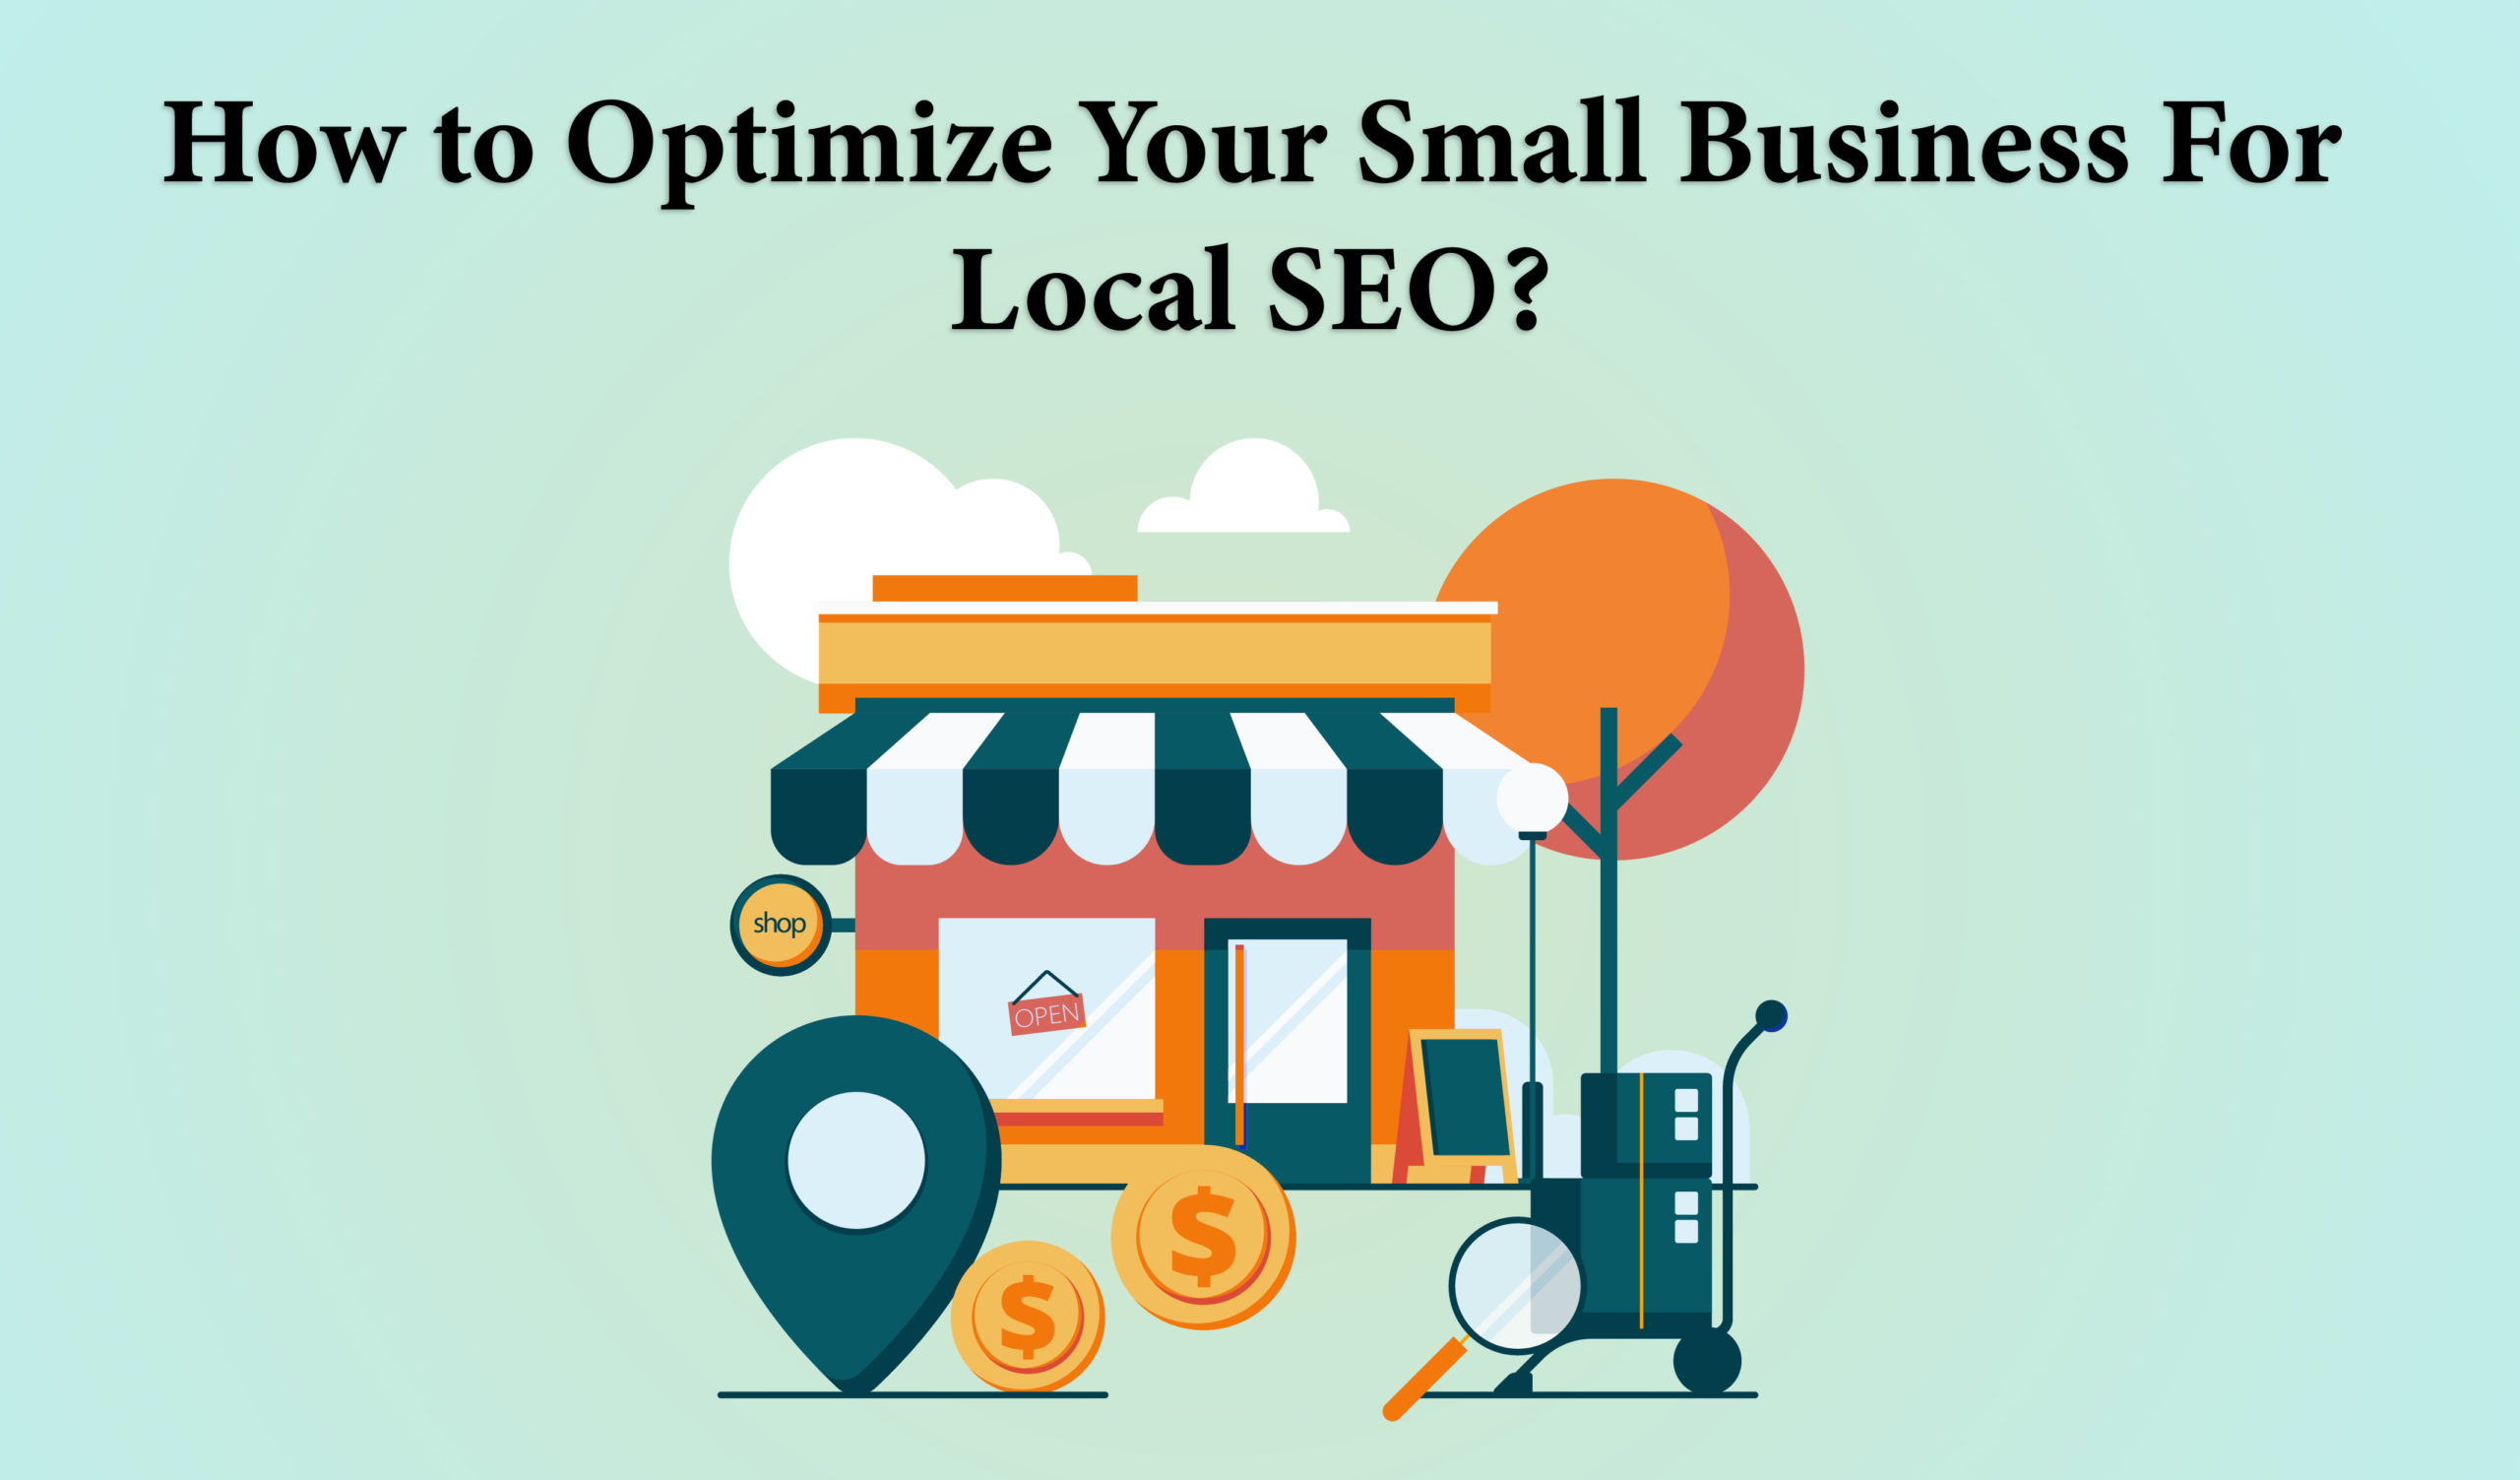 How to Optimize Your Small Business for Local SEO? – A Complete Checklist